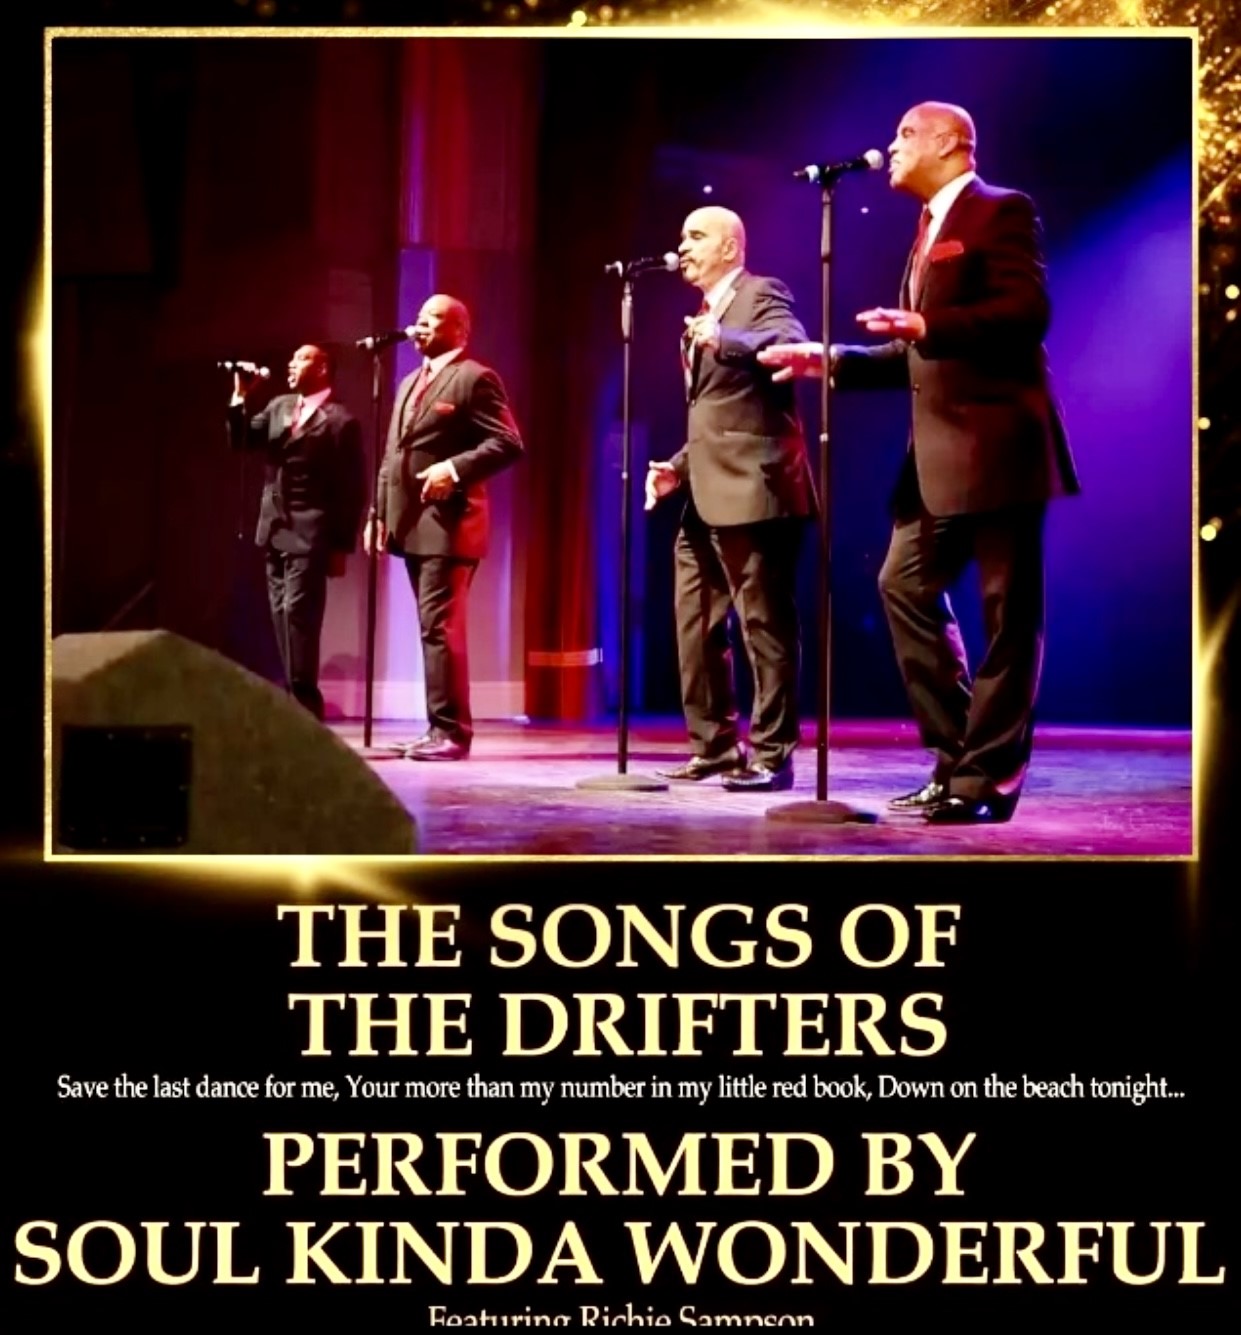 The Songs of The DRIFTERS & MORE performed by Soul Kinda Wonderful featuring Richie Sampson, formerly in The Drifters  on mai 04, 20:00@Peel Centenary Centre - Achetez des billets et obtenez des informations surRS PROMOTIONS 